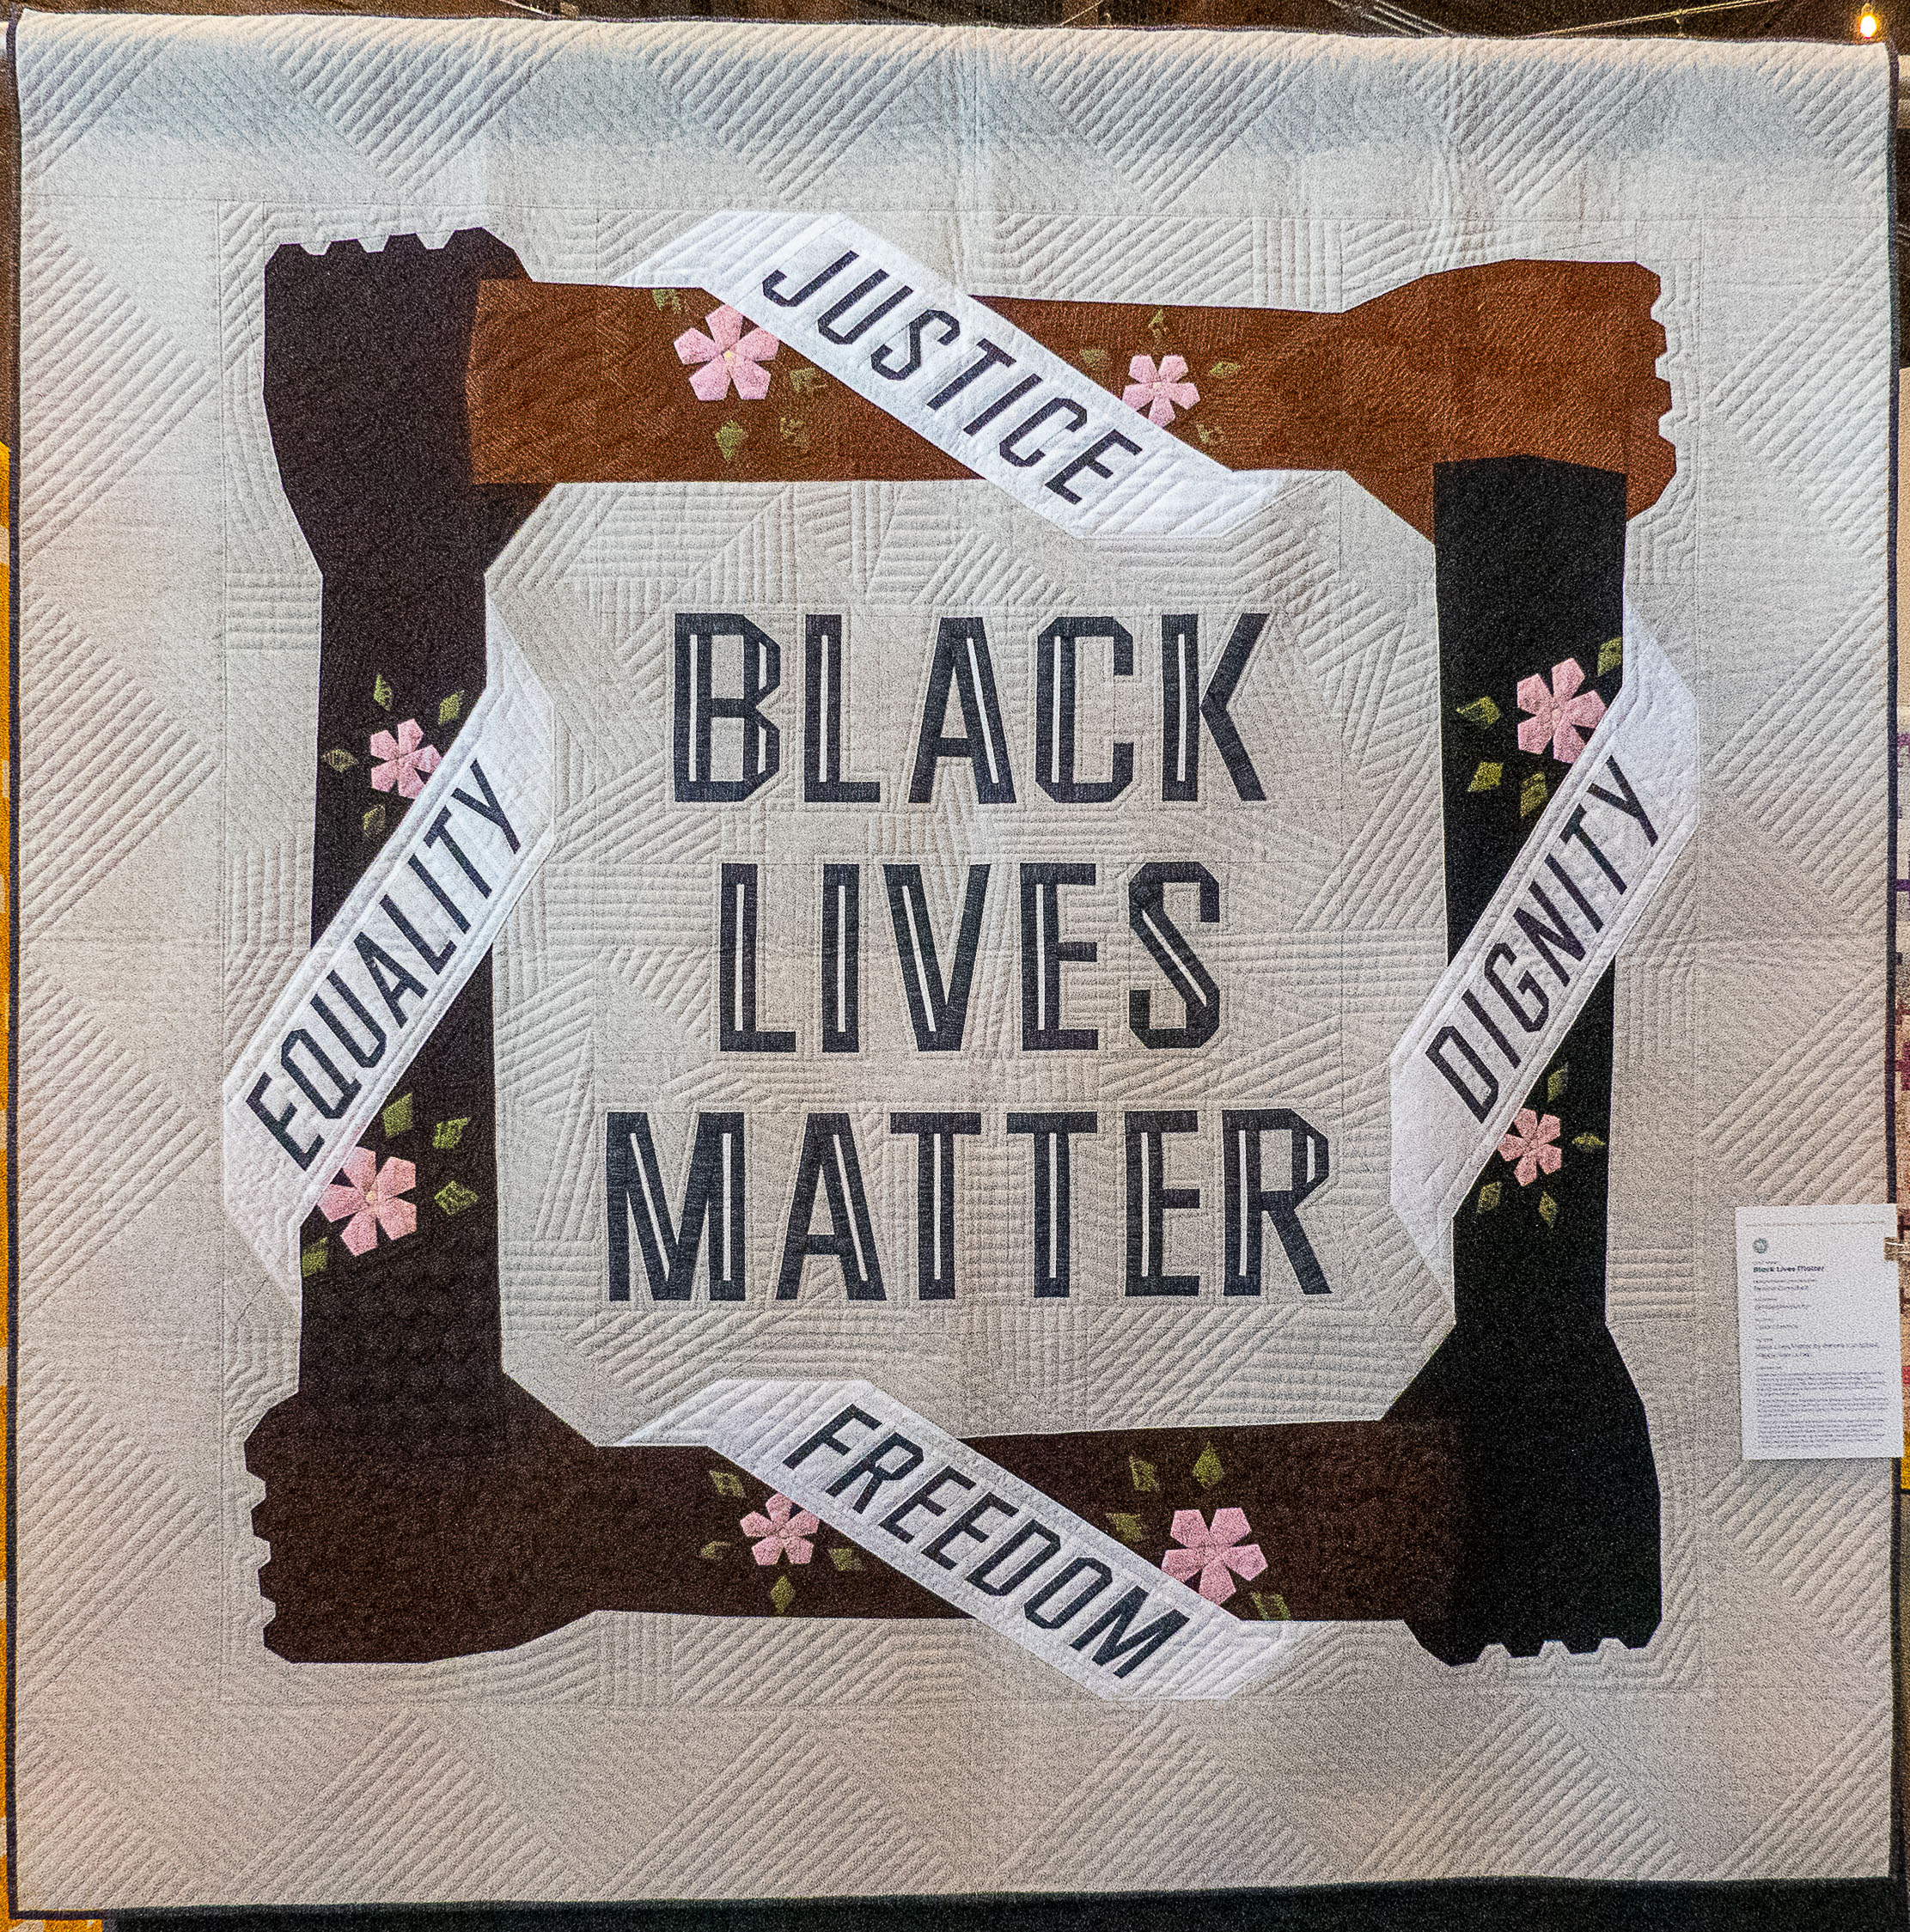 modern quilt with interlocking arms and words: Justice, dignity, freedom, equality